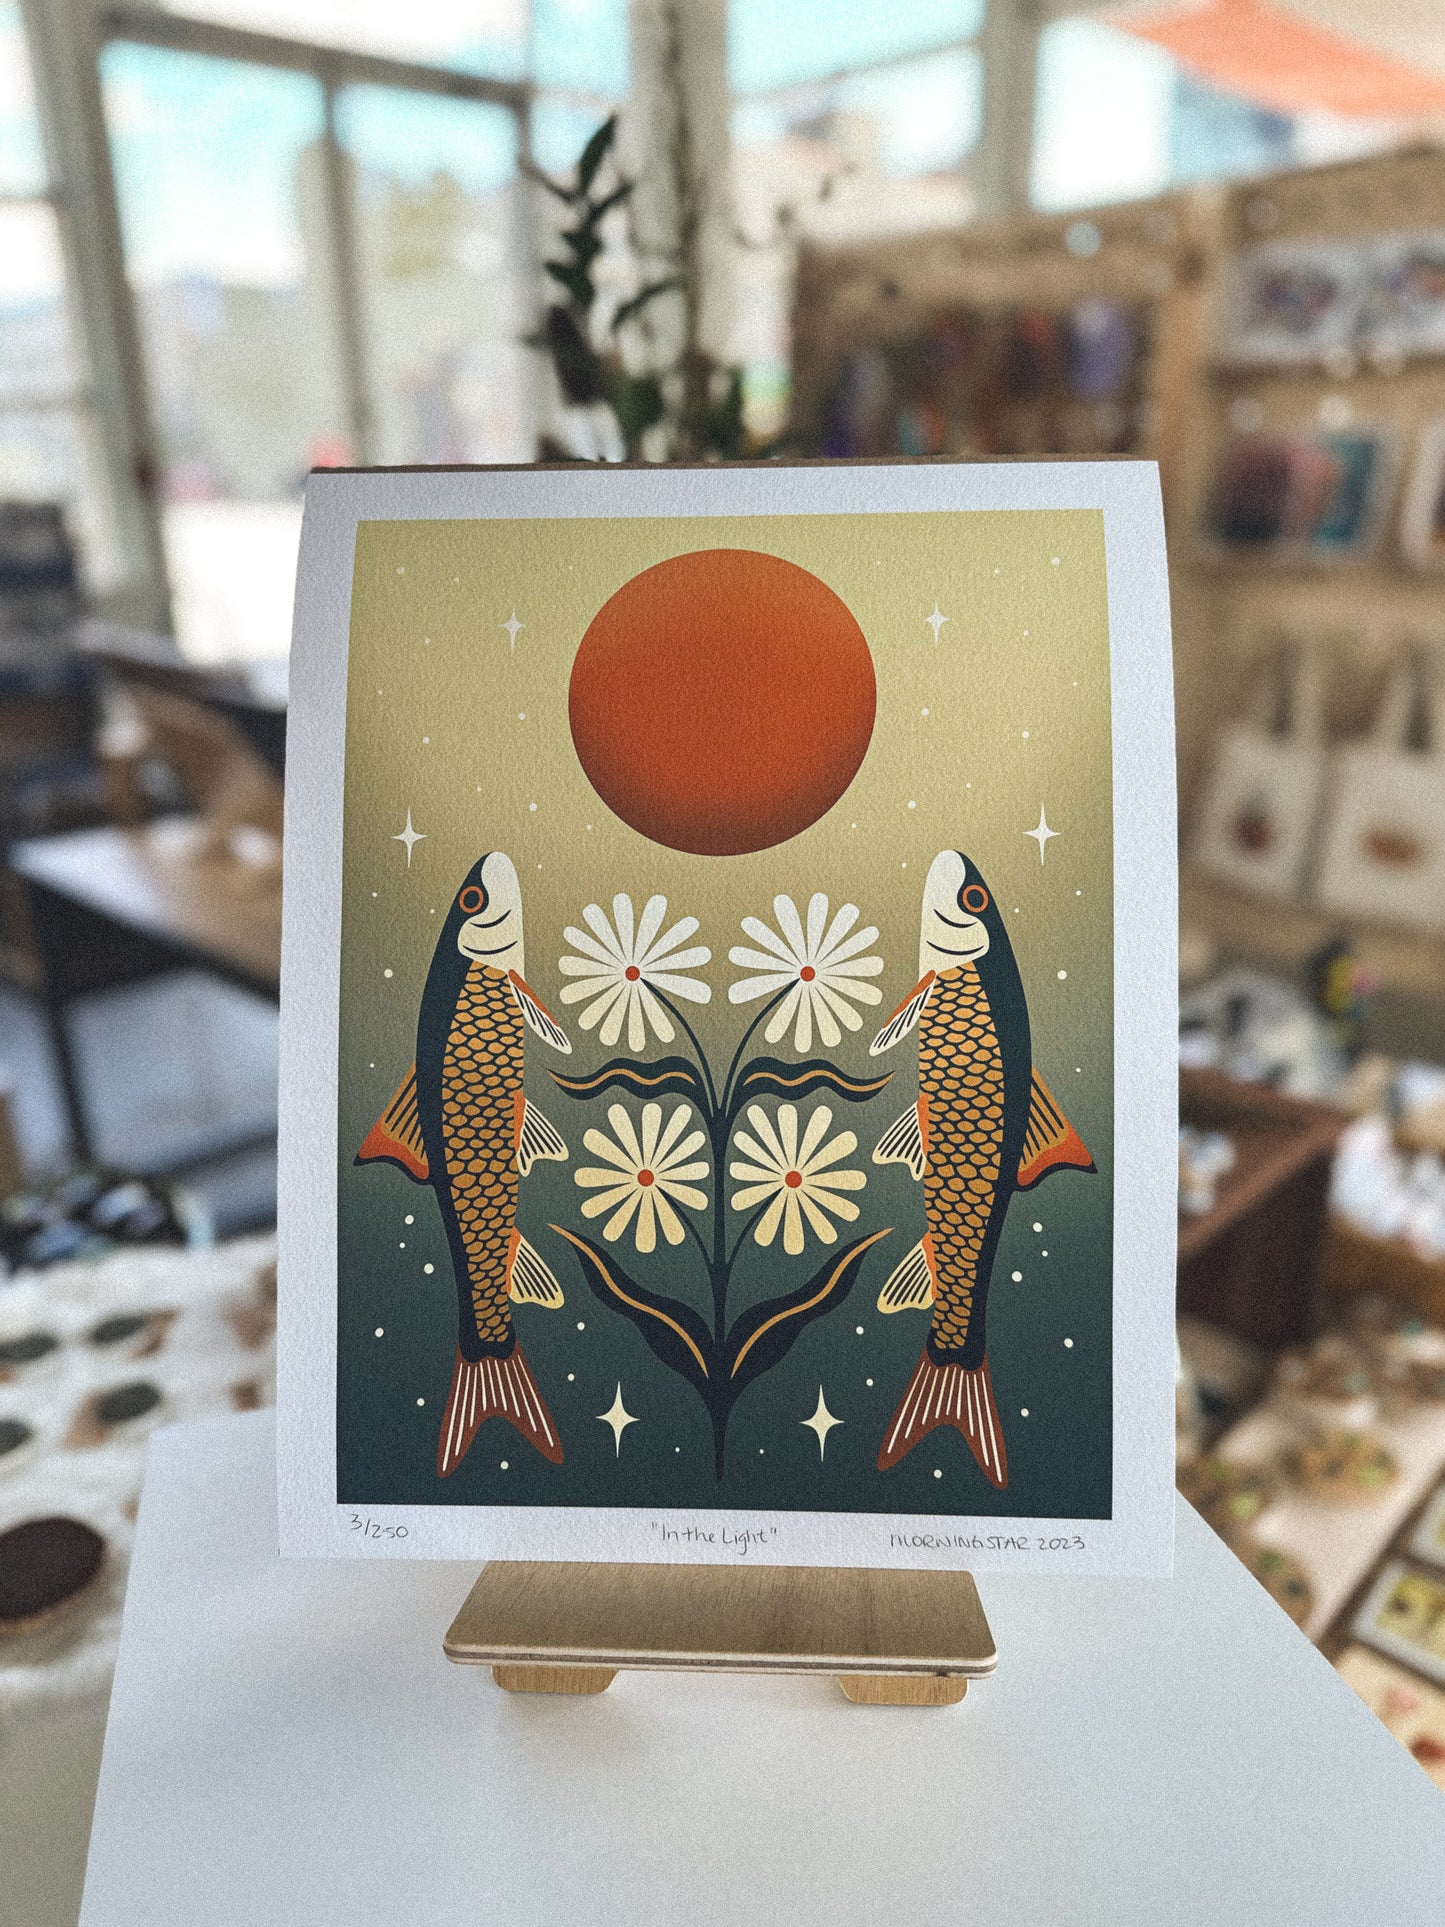 "In the Light" Limited Edition Print